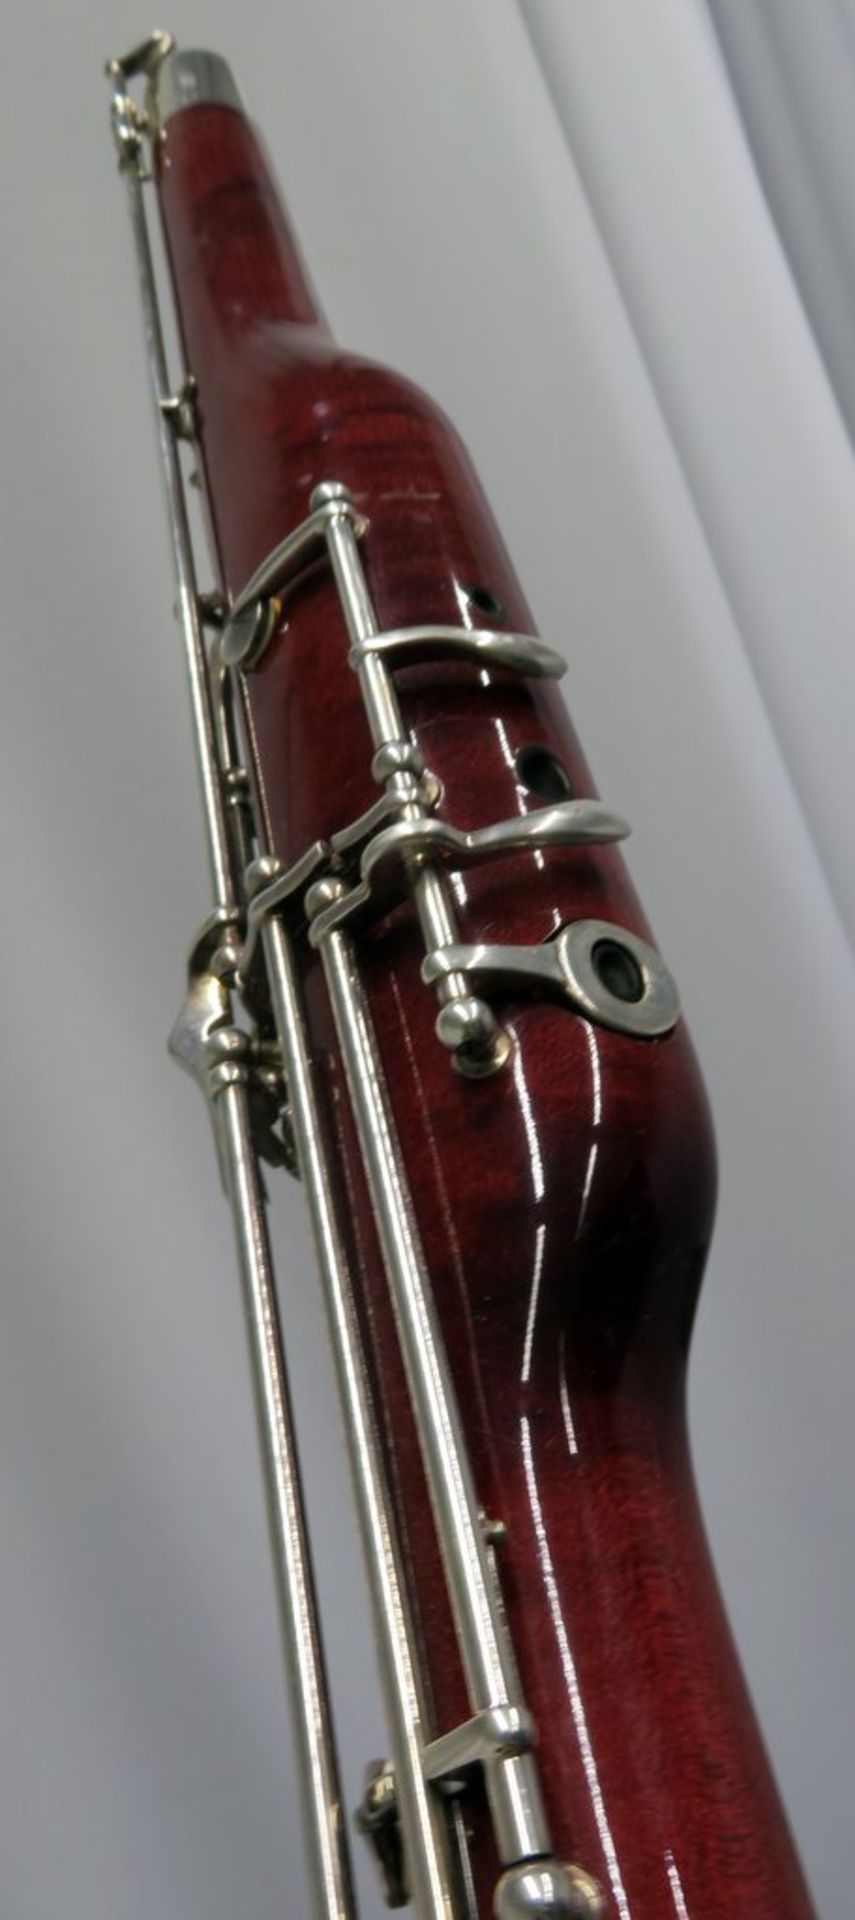 W.Schreiber S71 Bassoon Complete With Case. Serial Number: 31375. Please Note That This - Image 16 of 17